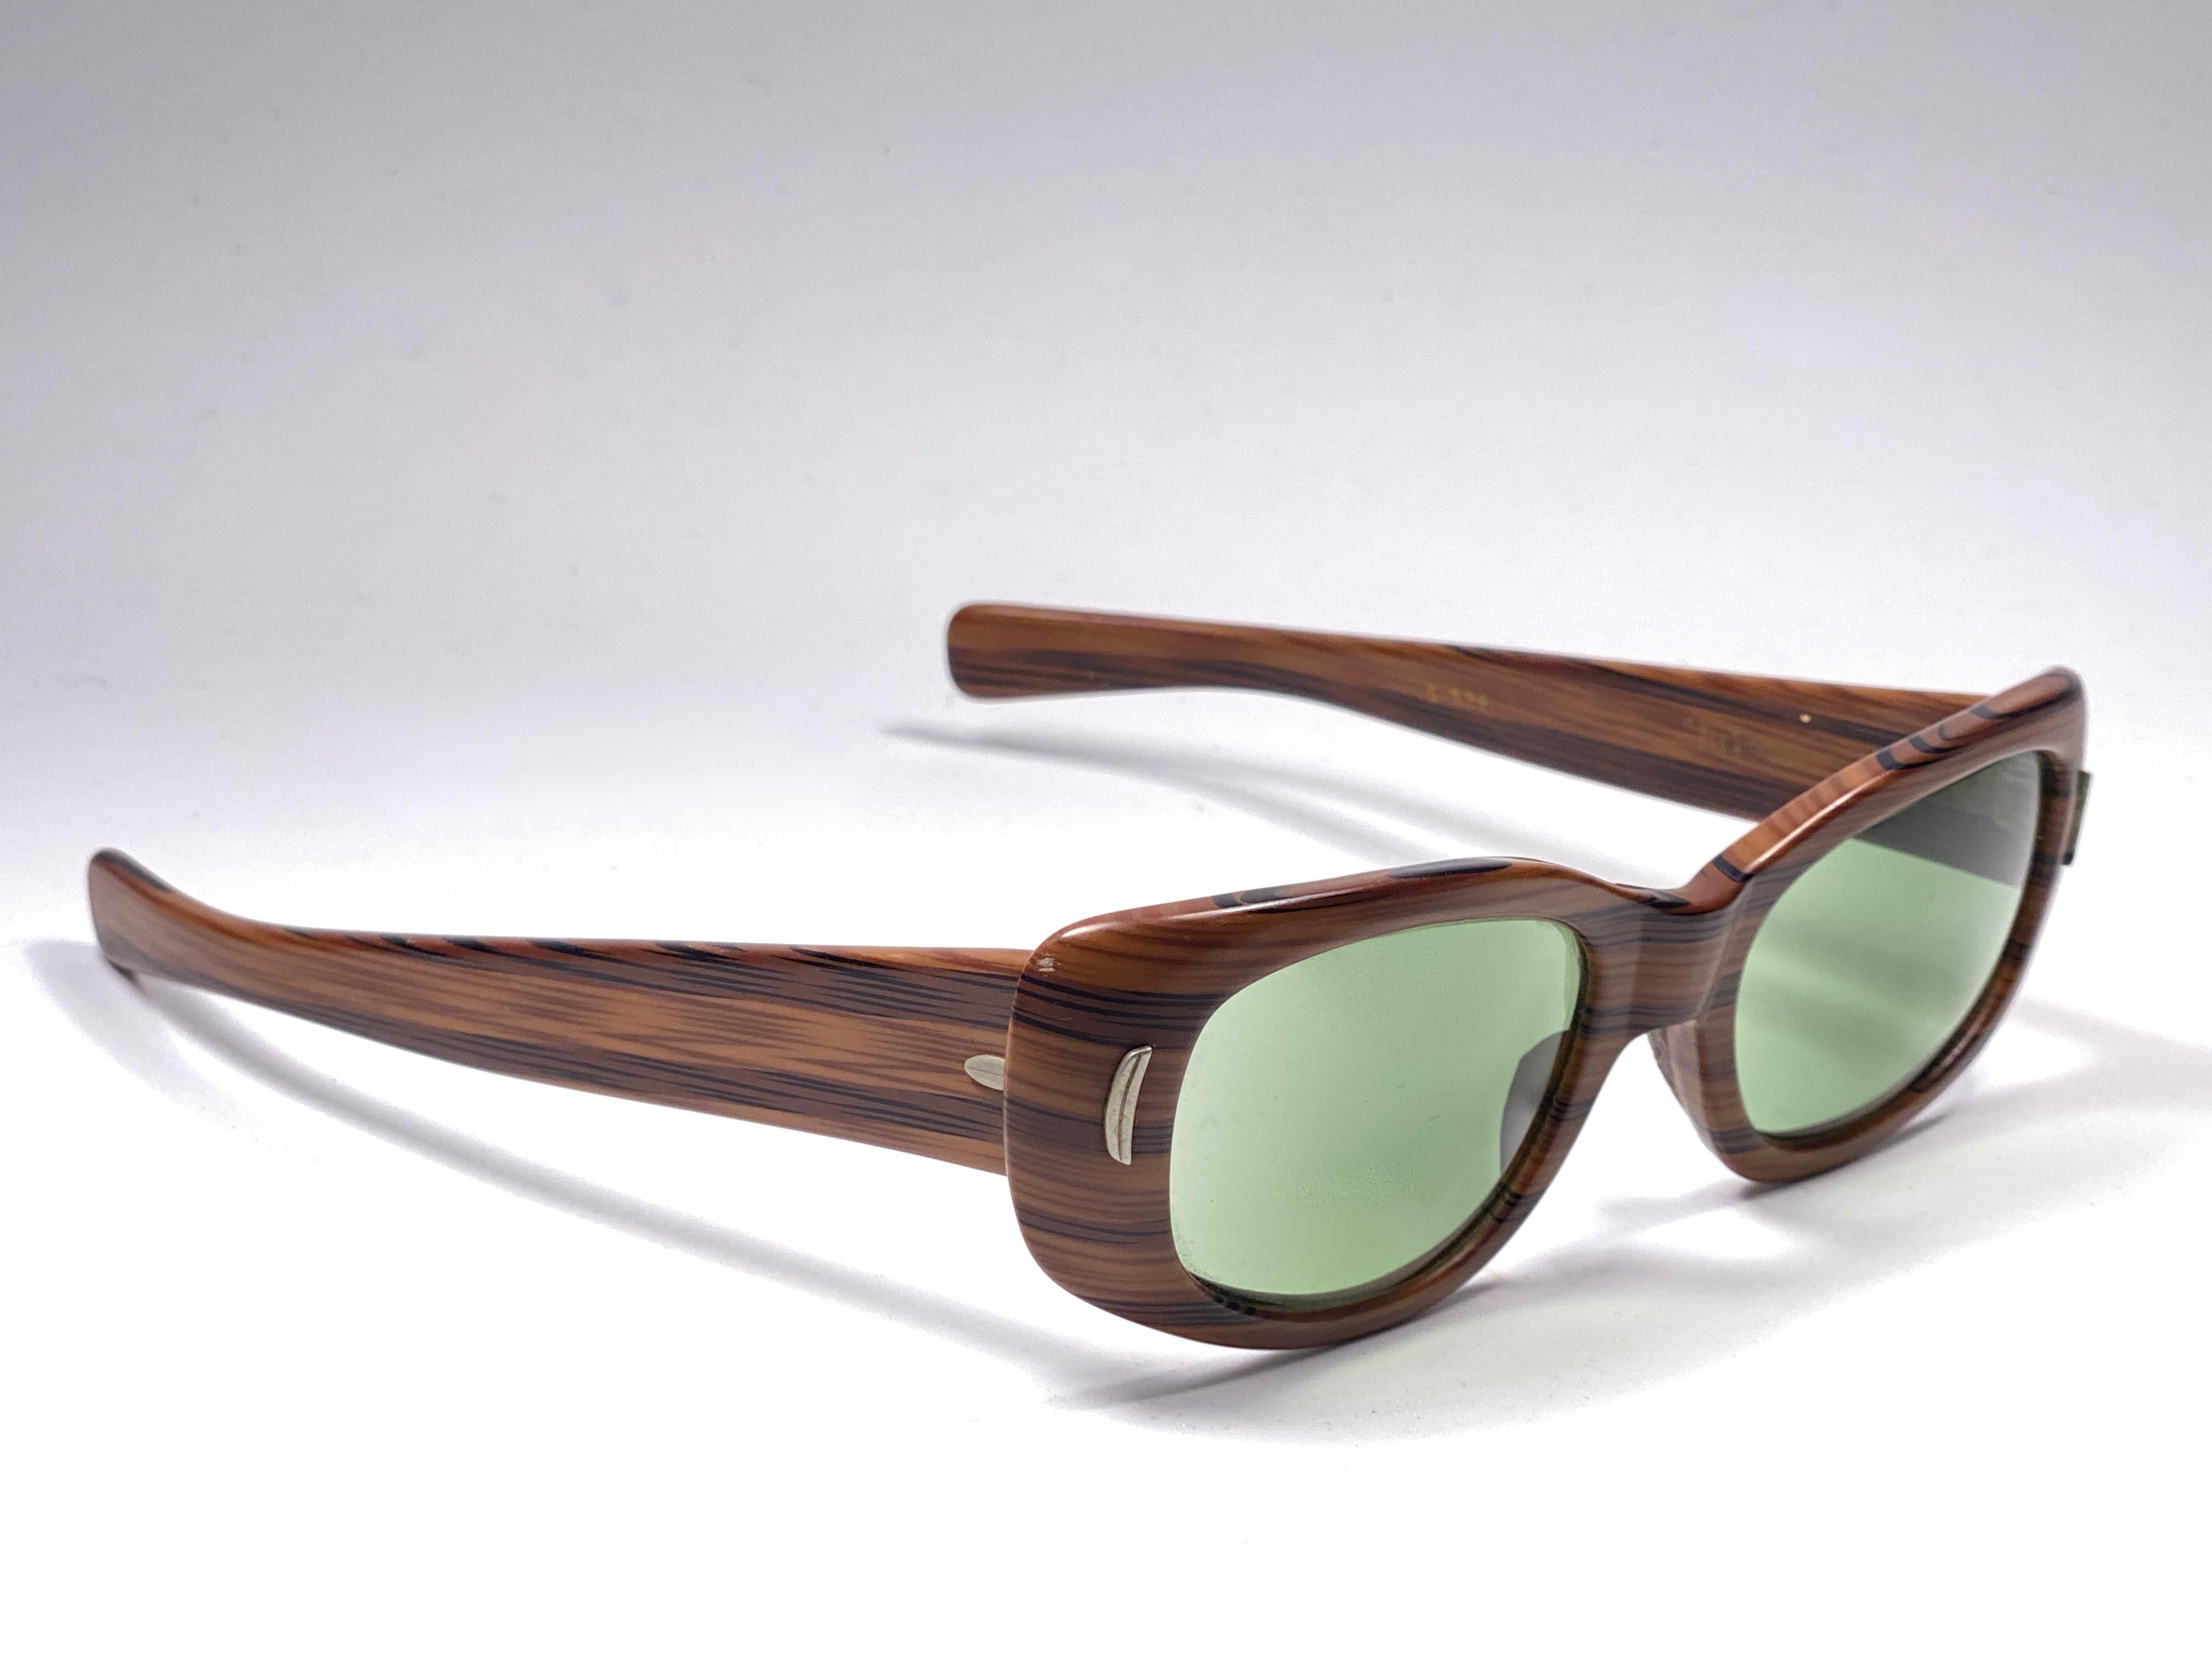 New Vintage Suntimer Victory sunglasses. Iconic striped wood resemblance frame with G15 grey lenses.

Please notice this item its almost 60 years old and may show minor sign of wear due to storage.

An original and seldom piece.